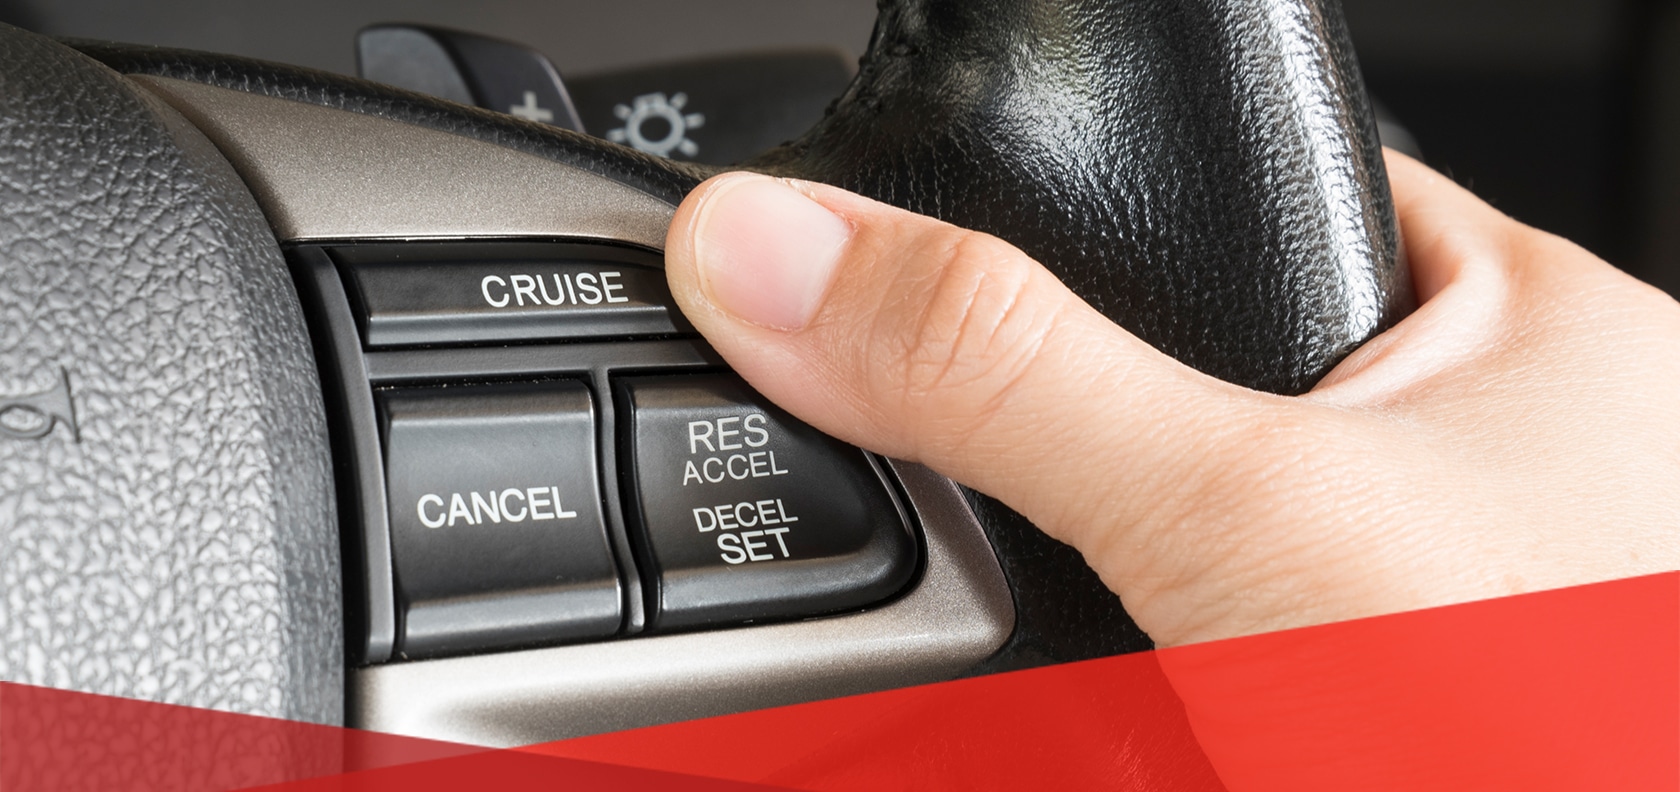 How Does the Cruise Control in Cars Work? - MAPFRE Insurance